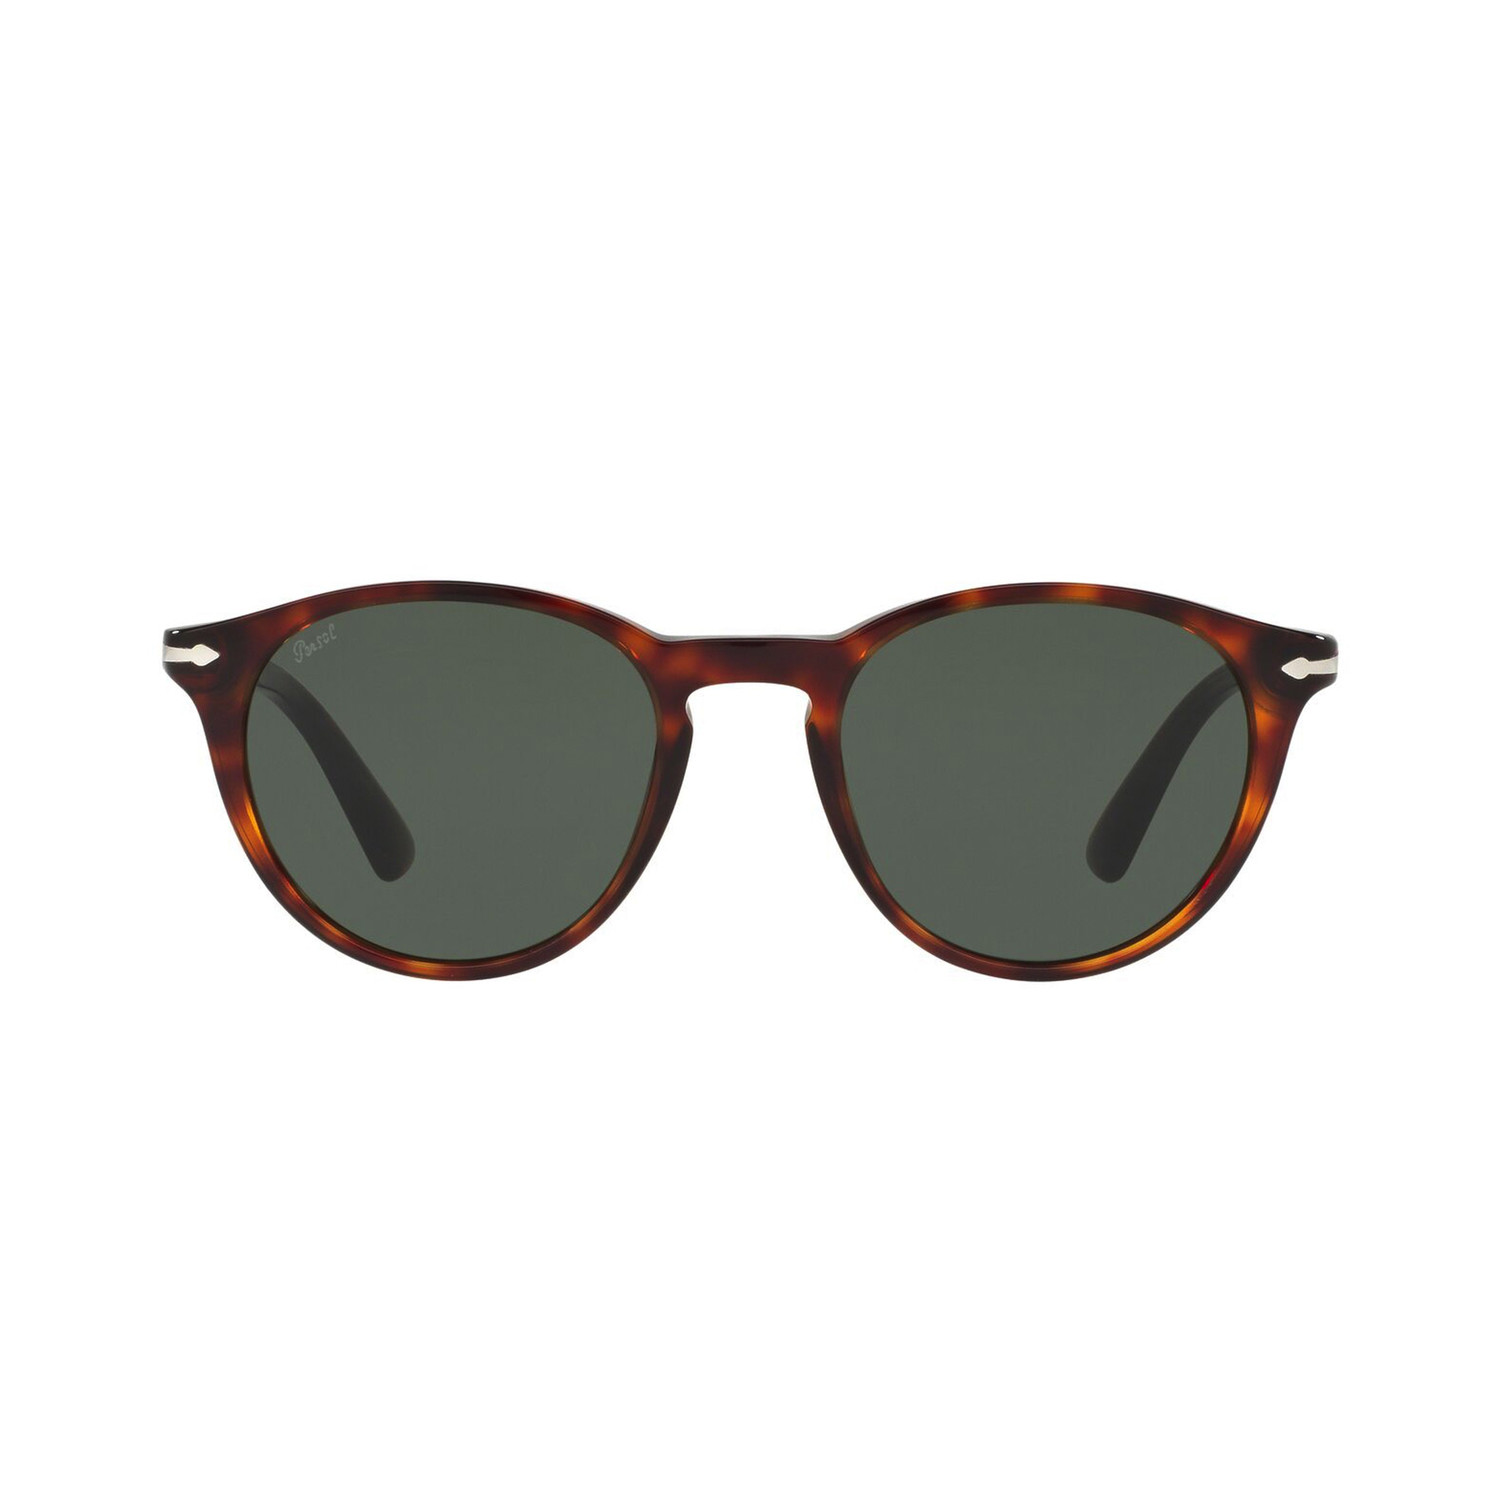 Men's Classic Round Sunglasses // Havana + Gray - Persol - Touch of Modern